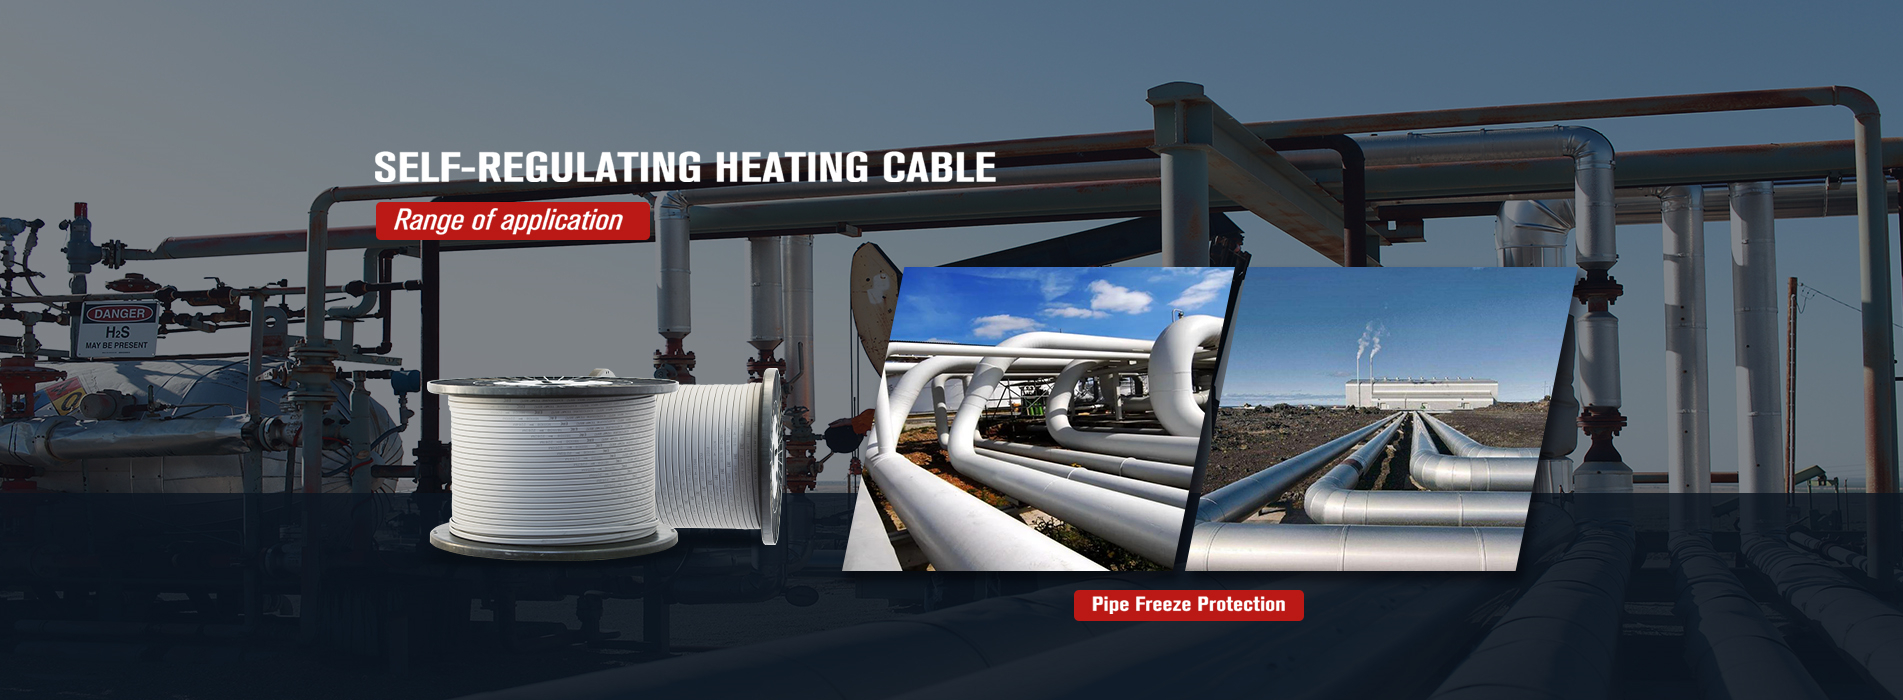 Self-Regulating Heating Cables